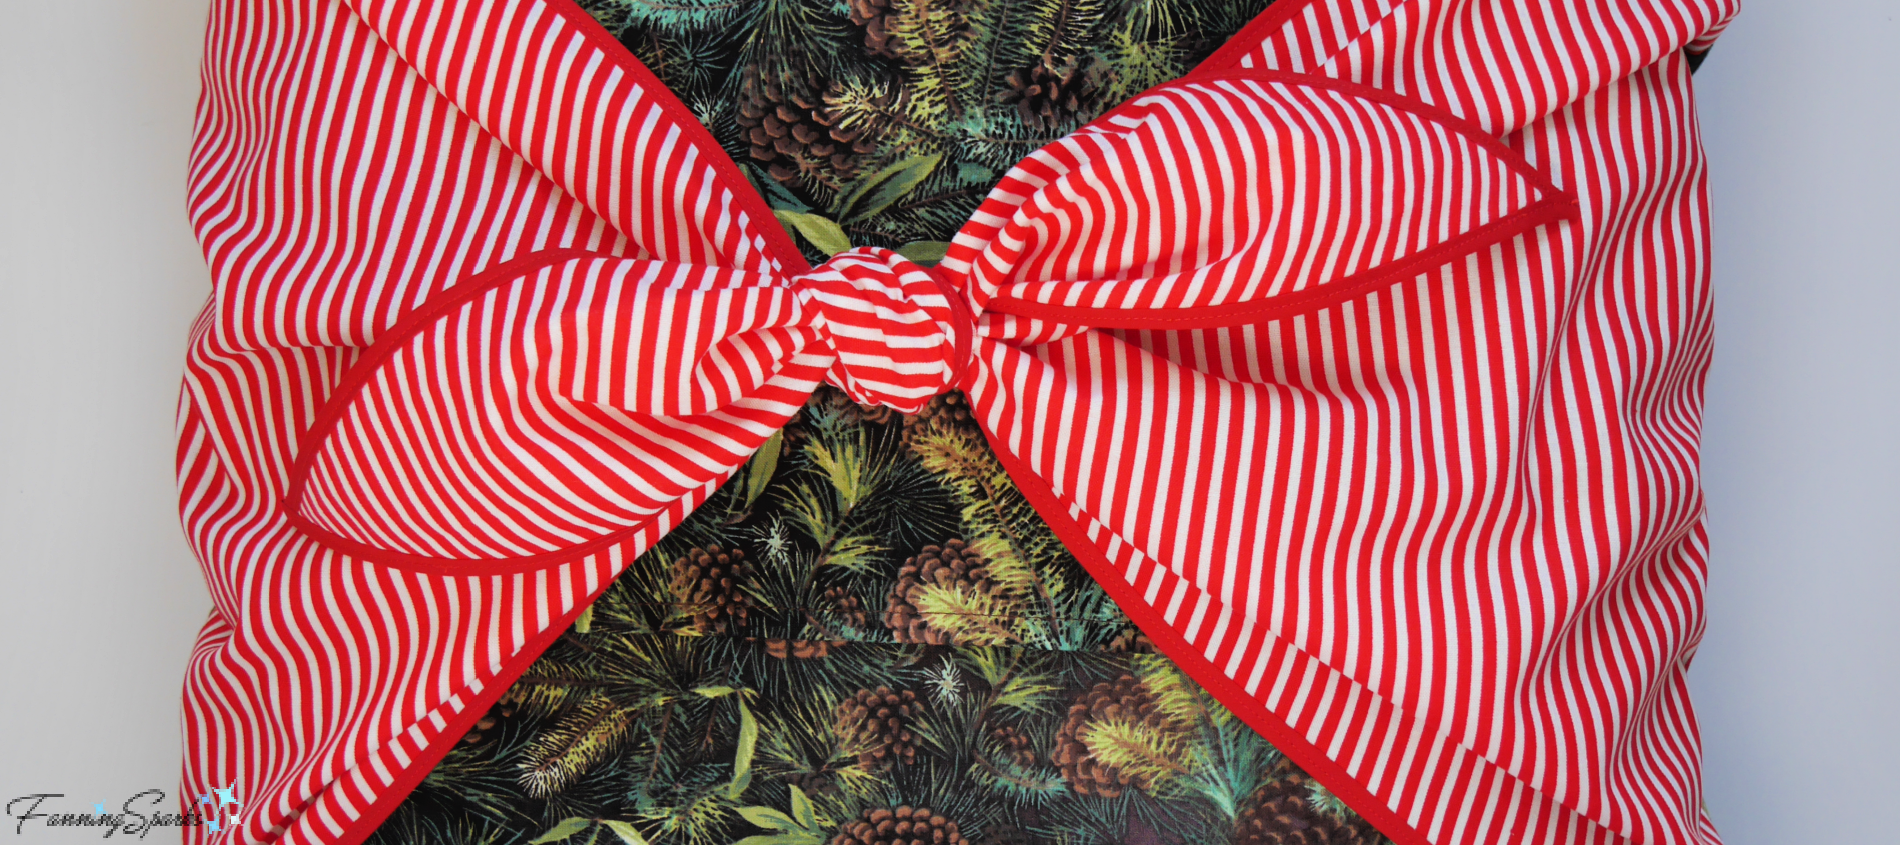 Bias Fold Day 9: Half bow knot. Found some instructions online for